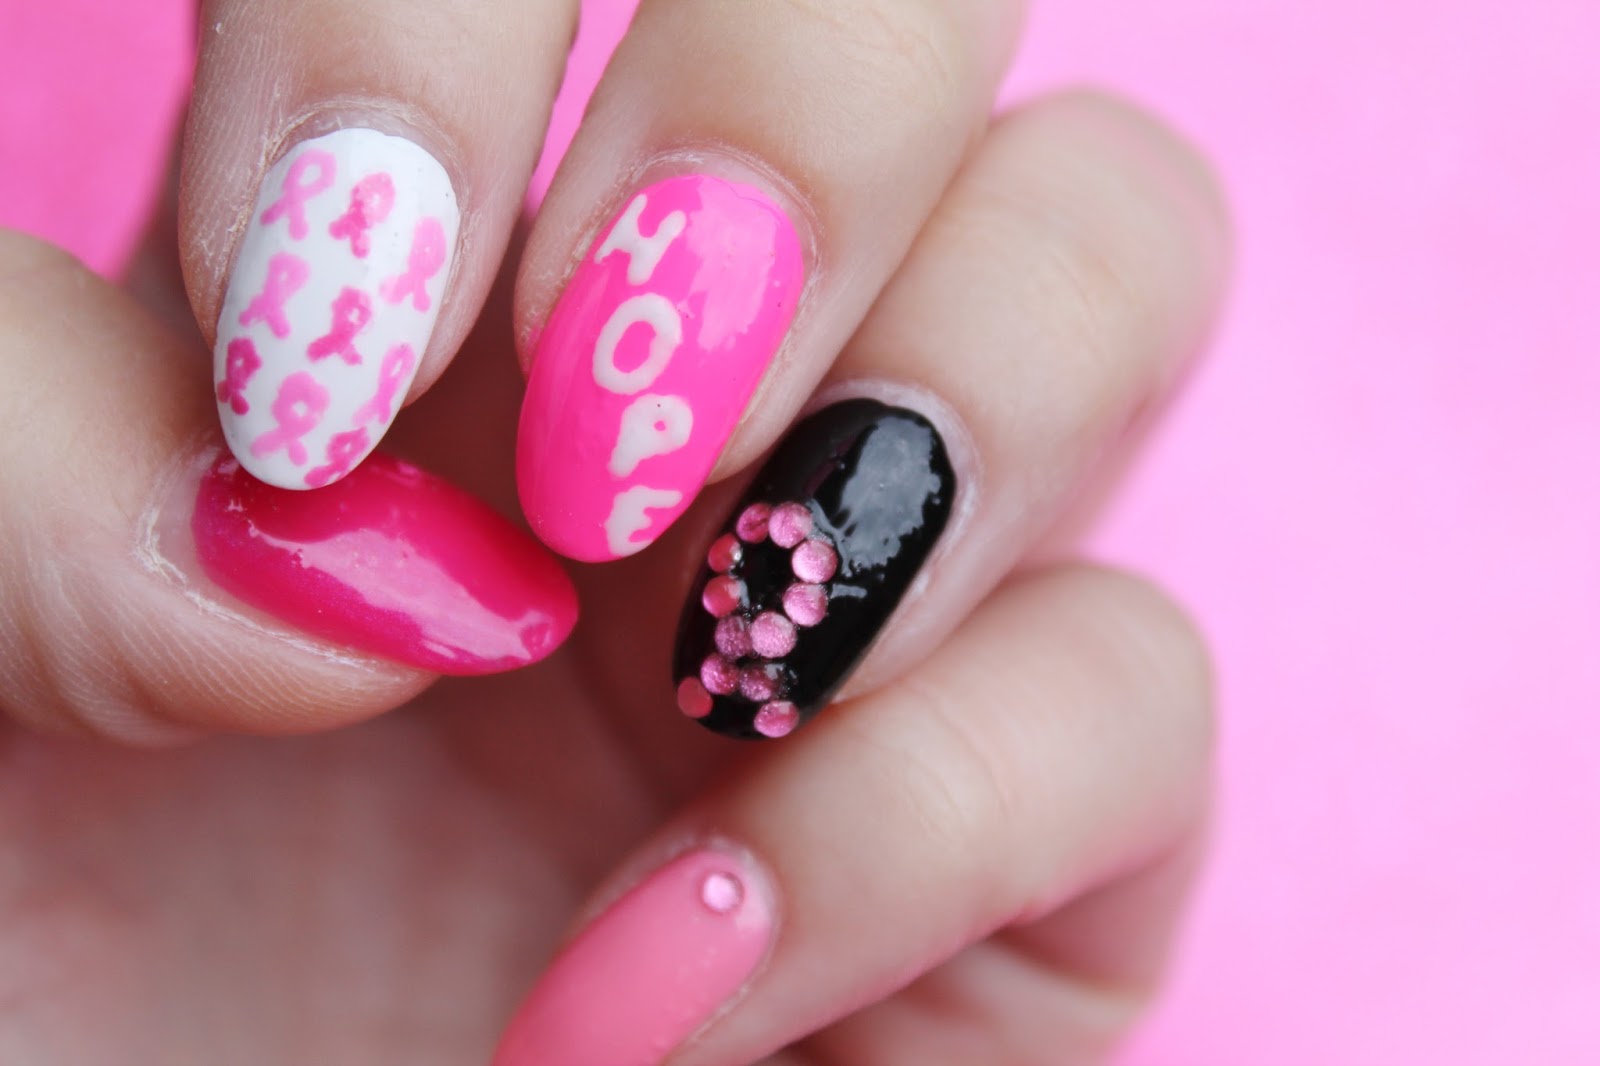 3. How to Create Nail Art Ribbons for Breast Cancer Awareness - wide 5